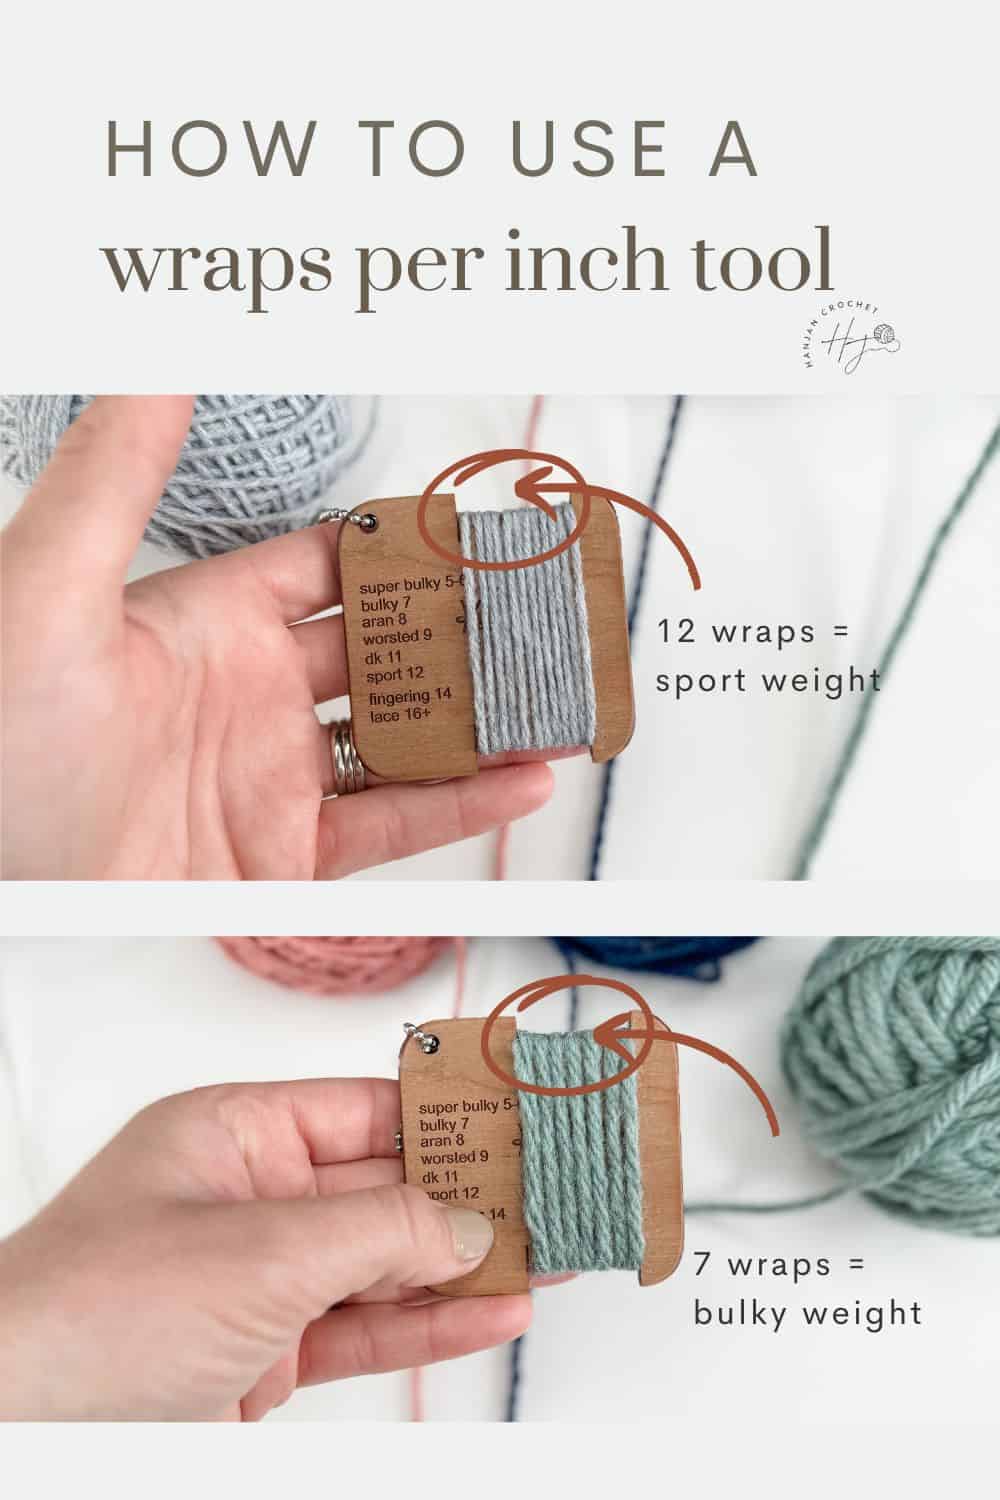 Two images demonstrate using a wraps per inch tool for yarn. The top image shows 12 wraps labeled as sport weight, while the bottom image displays 7 wraps identified as bulky weight. This visual effectively complements any yarn weight chart for quick reference.